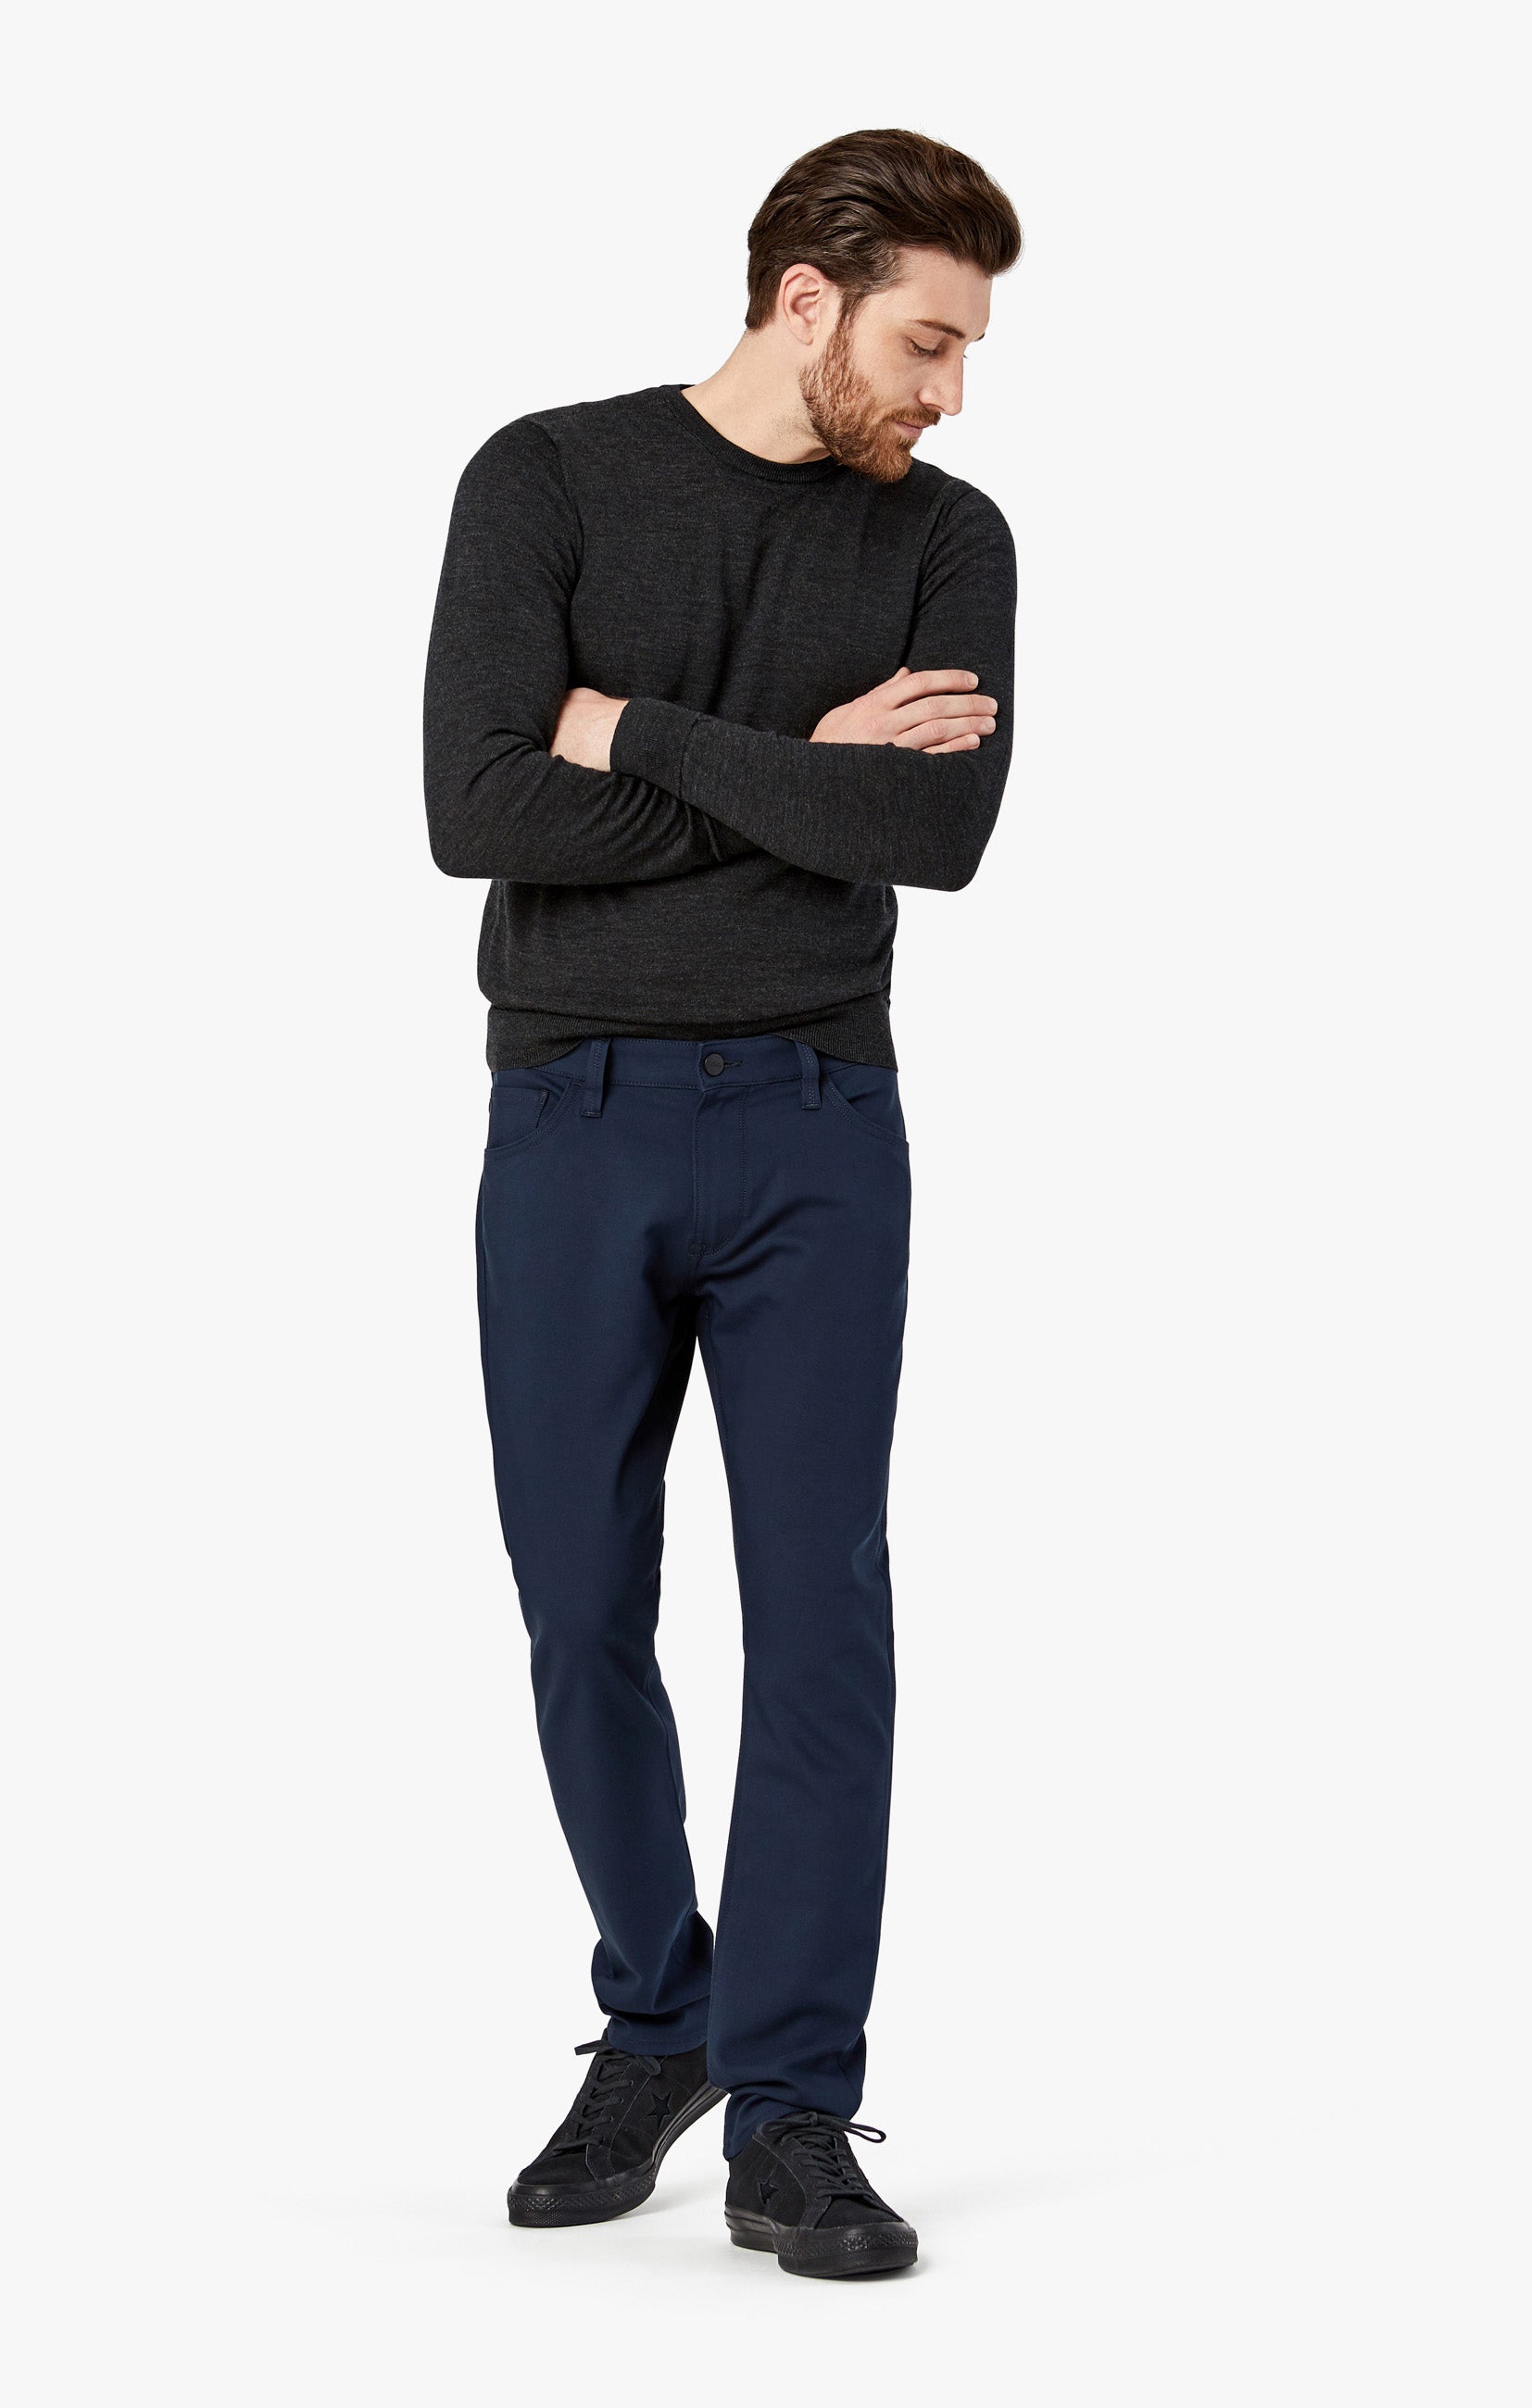 Courage Straight Leg Commuter Pants in Navy Image 7